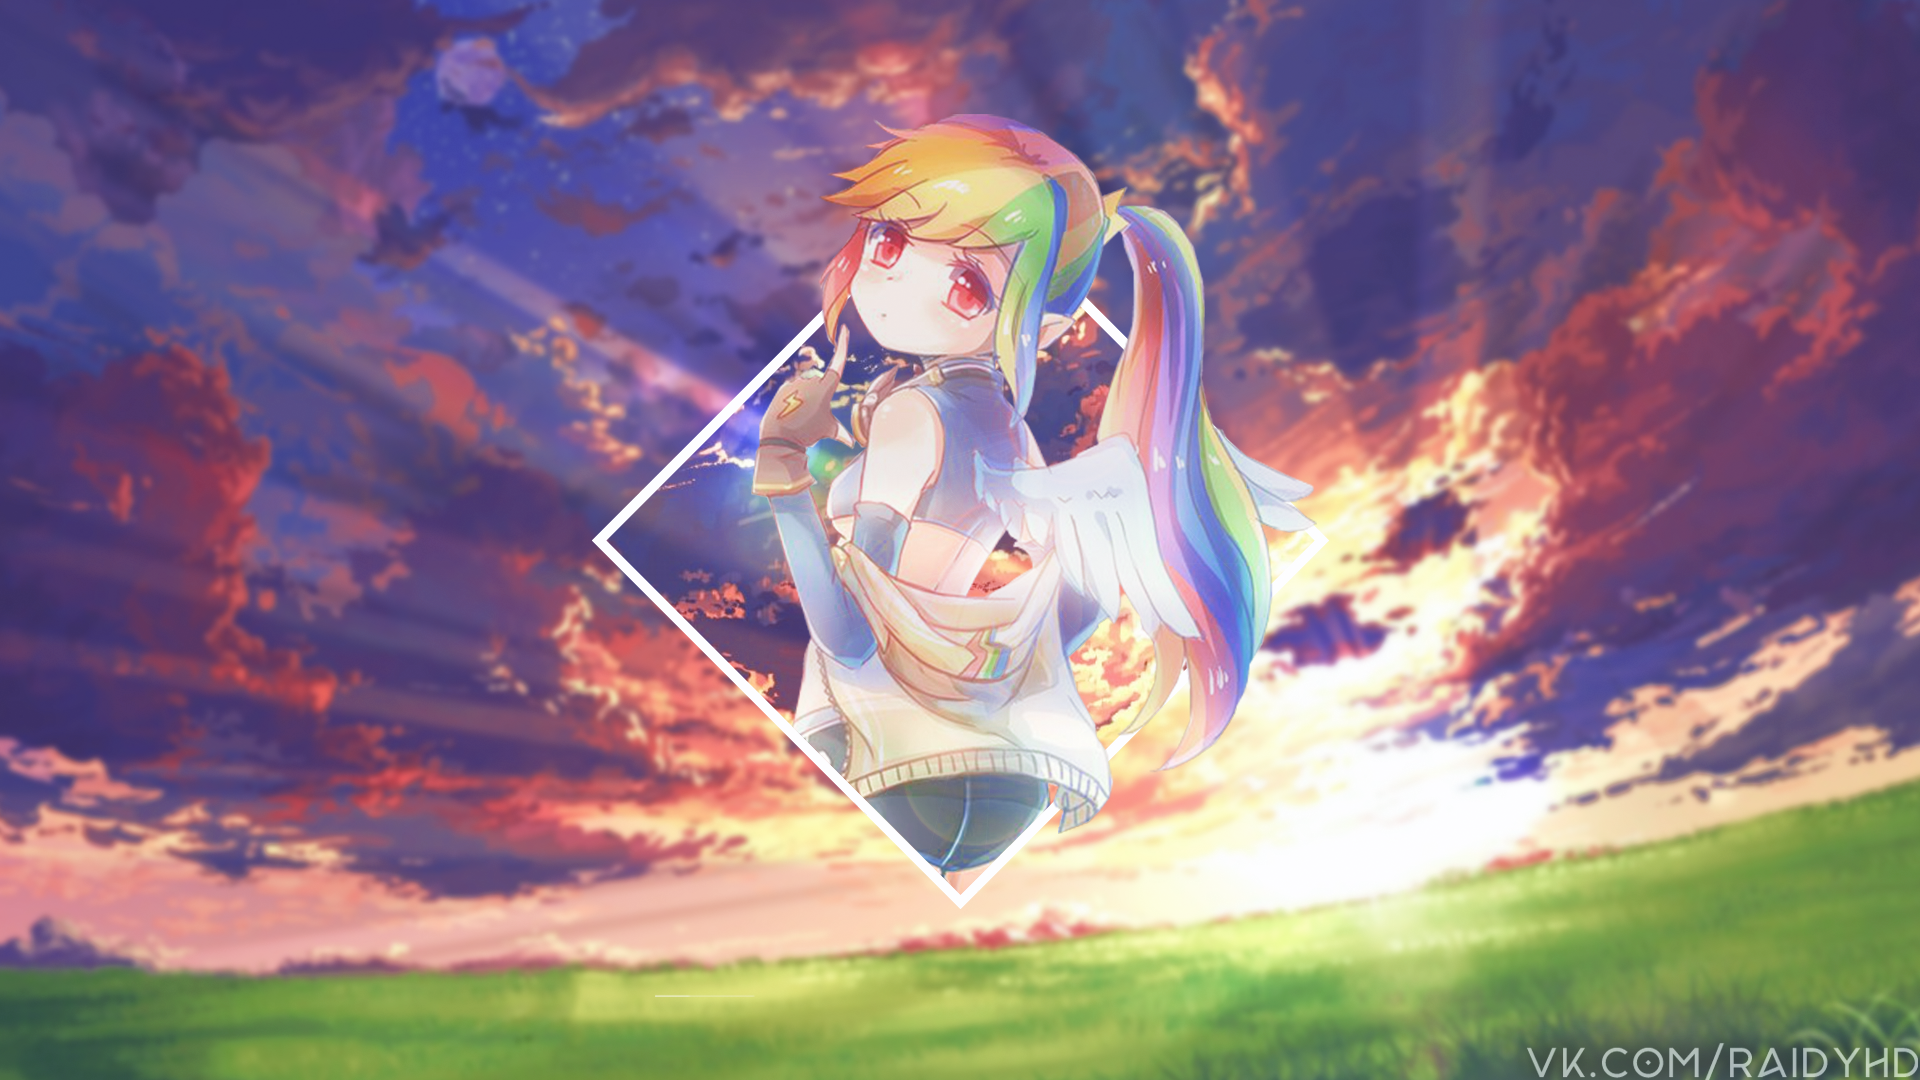 Anime Girls Picture In Picture My Little Pony Rainbow Dash Wallpaper:1920x1080